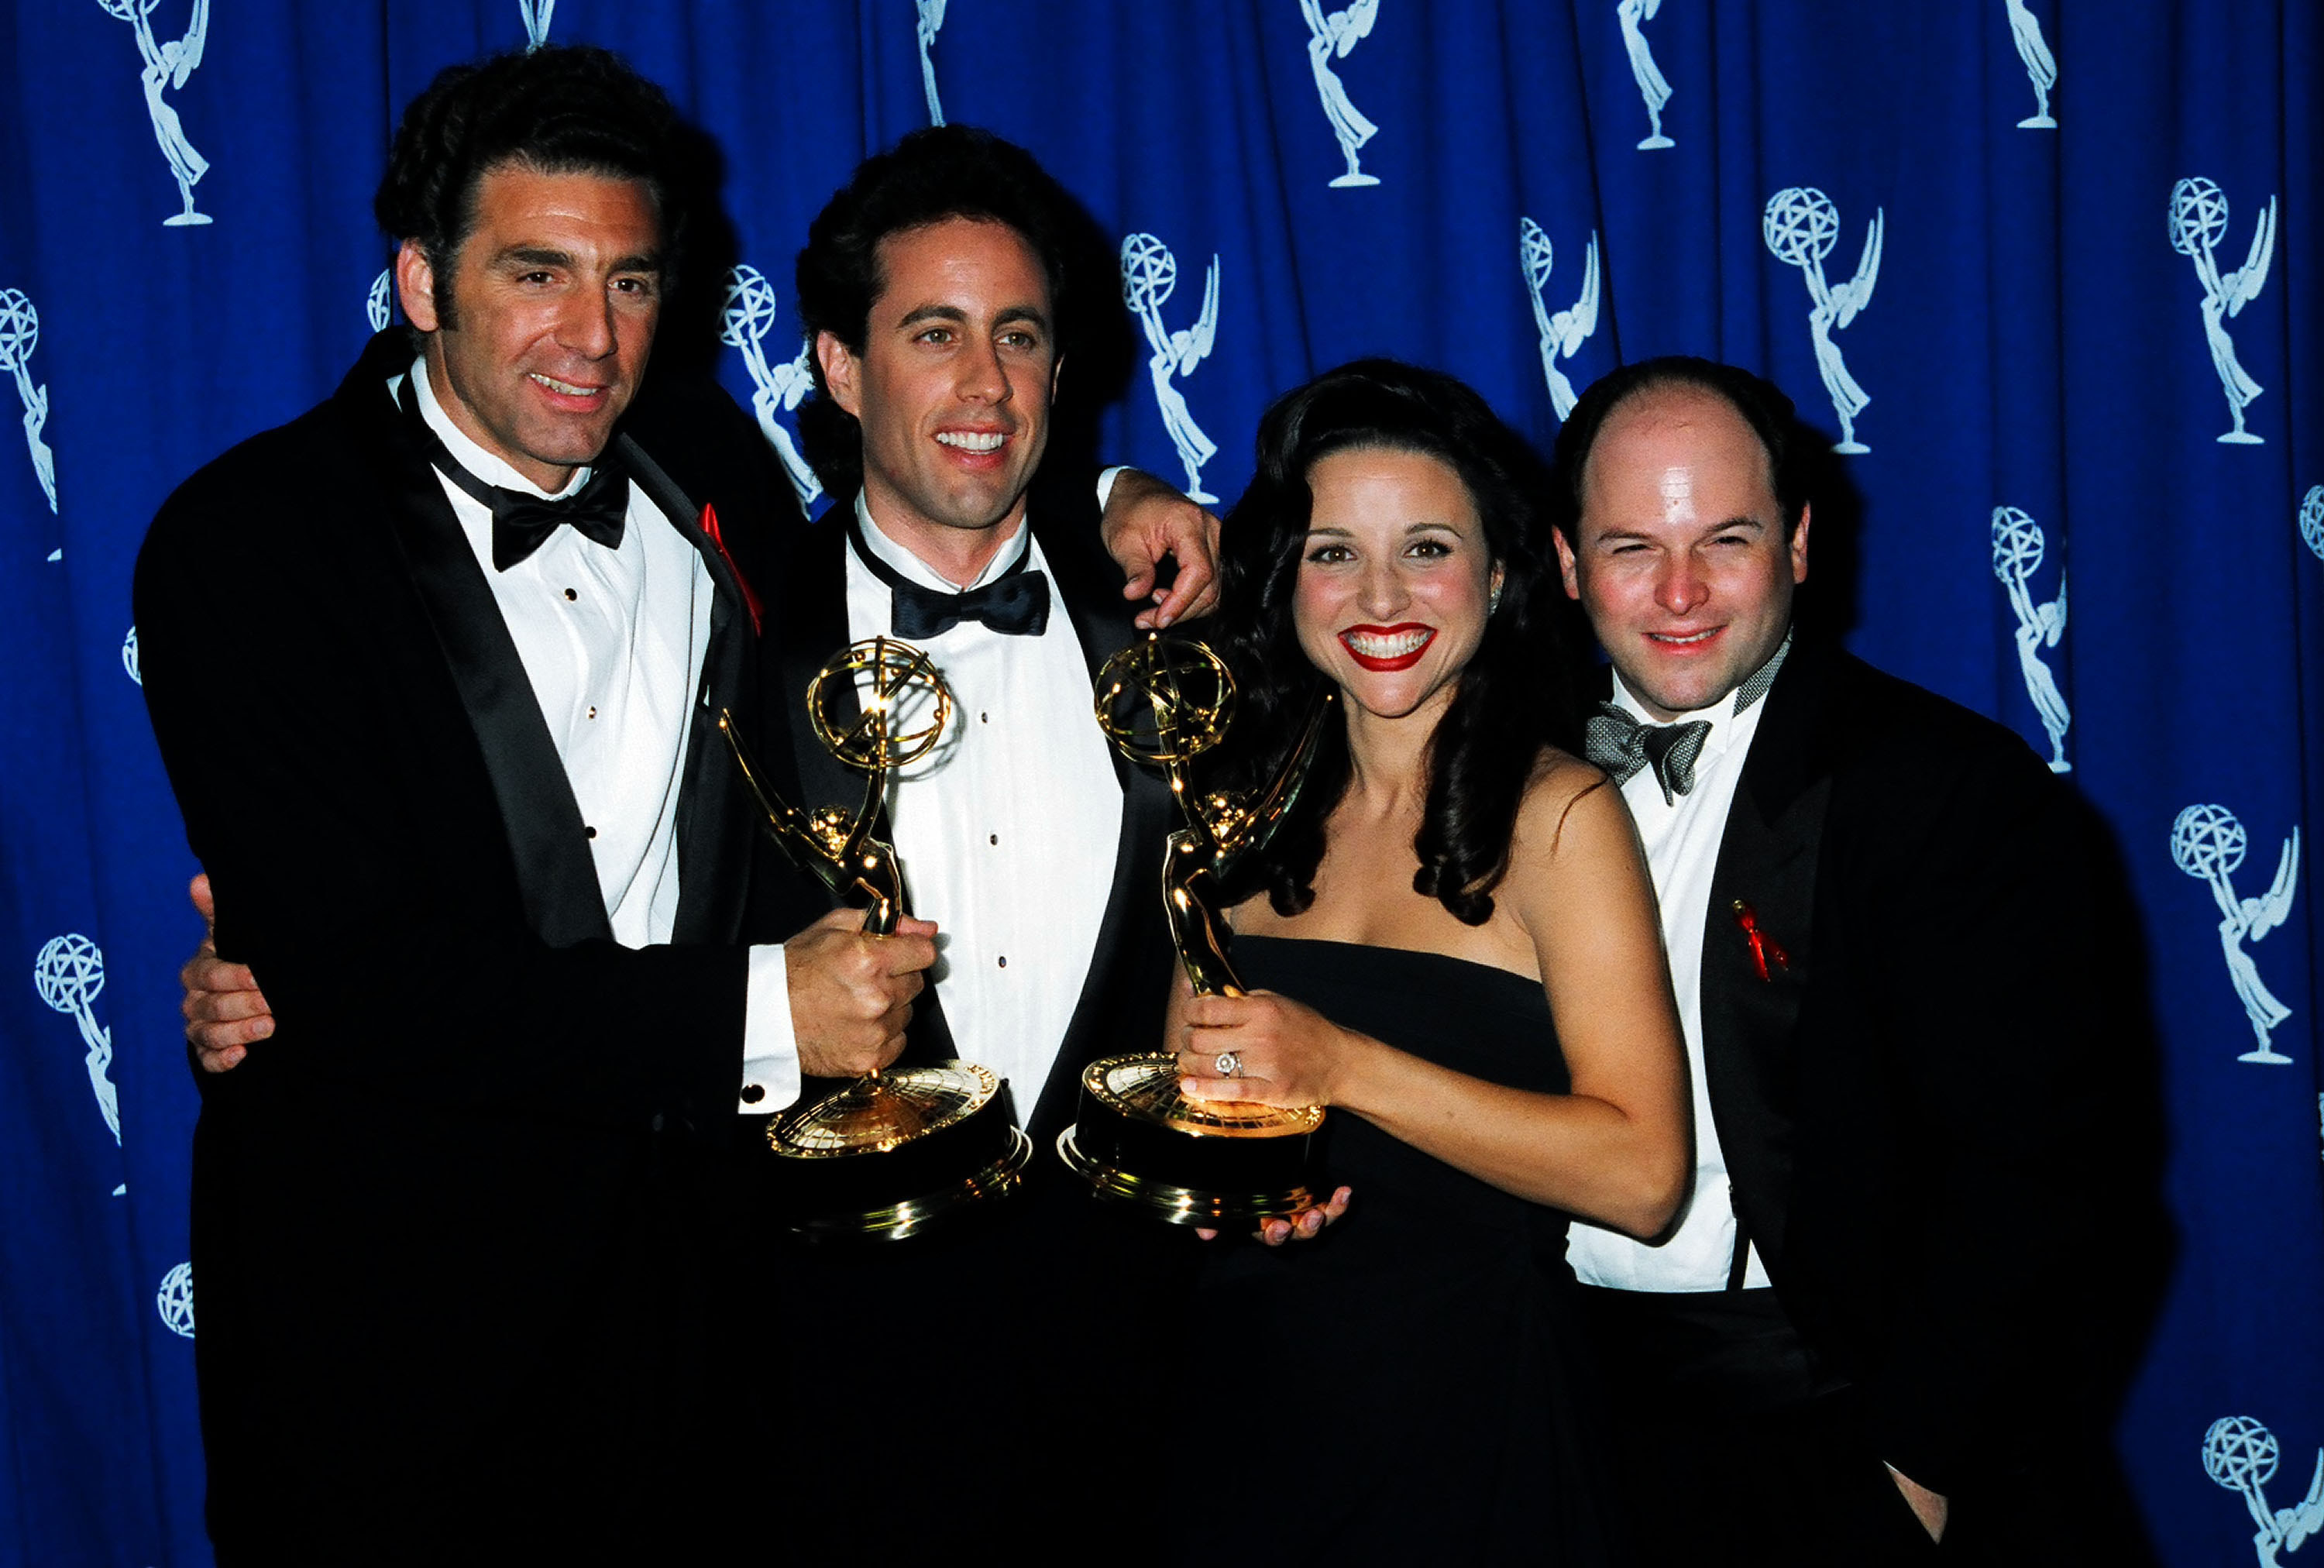 The cast of Seinfeld celebrating their Emmy wins